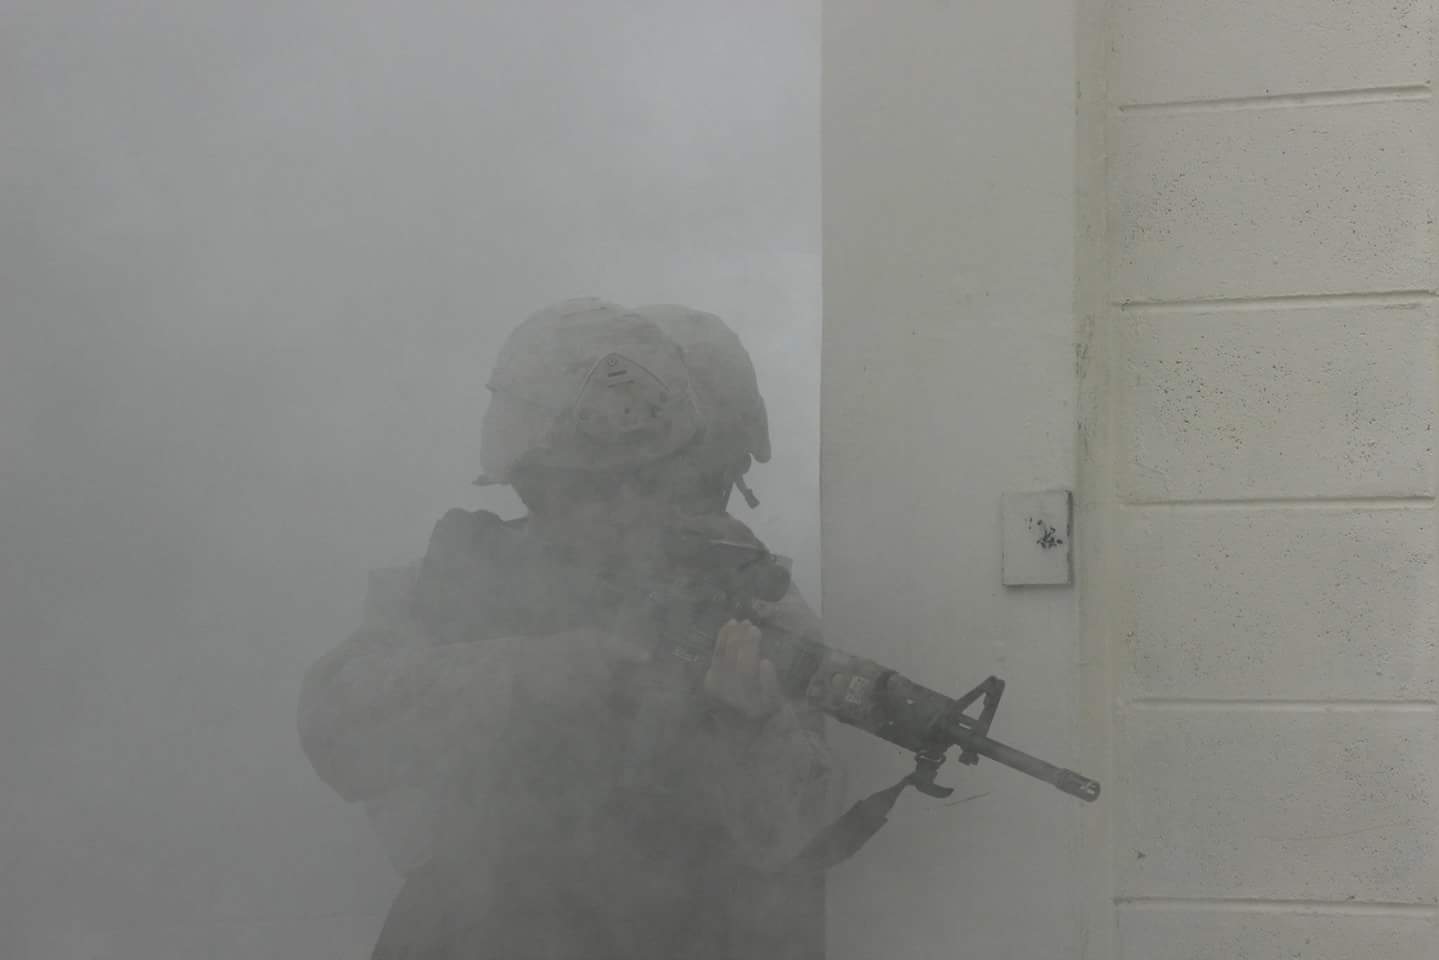 A picture of the military person standing with the gun